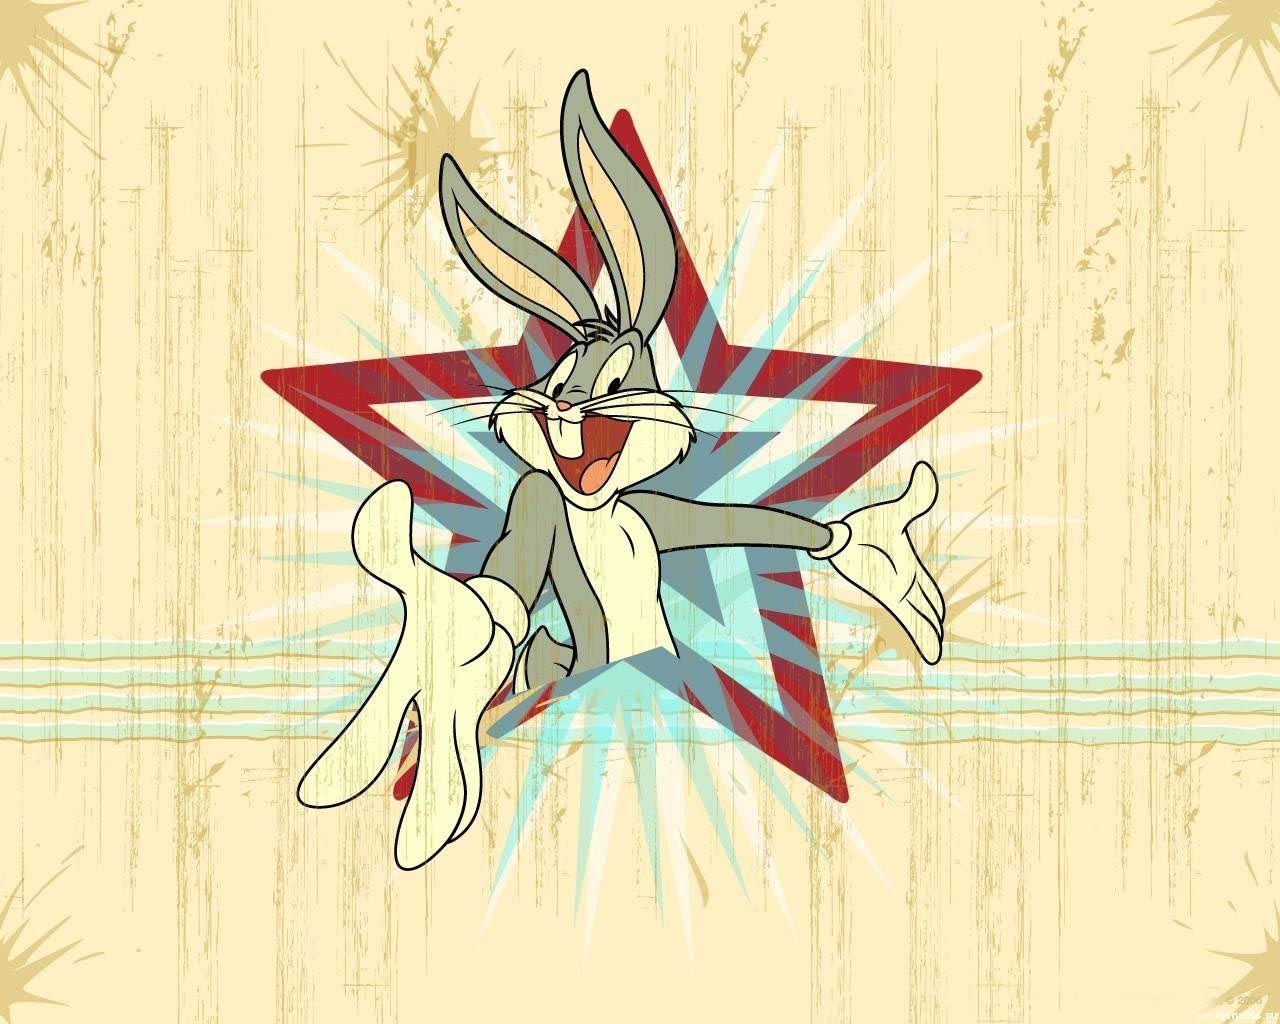 Bugs Bunny Wallpaper, Find best latest Bugs Bunny